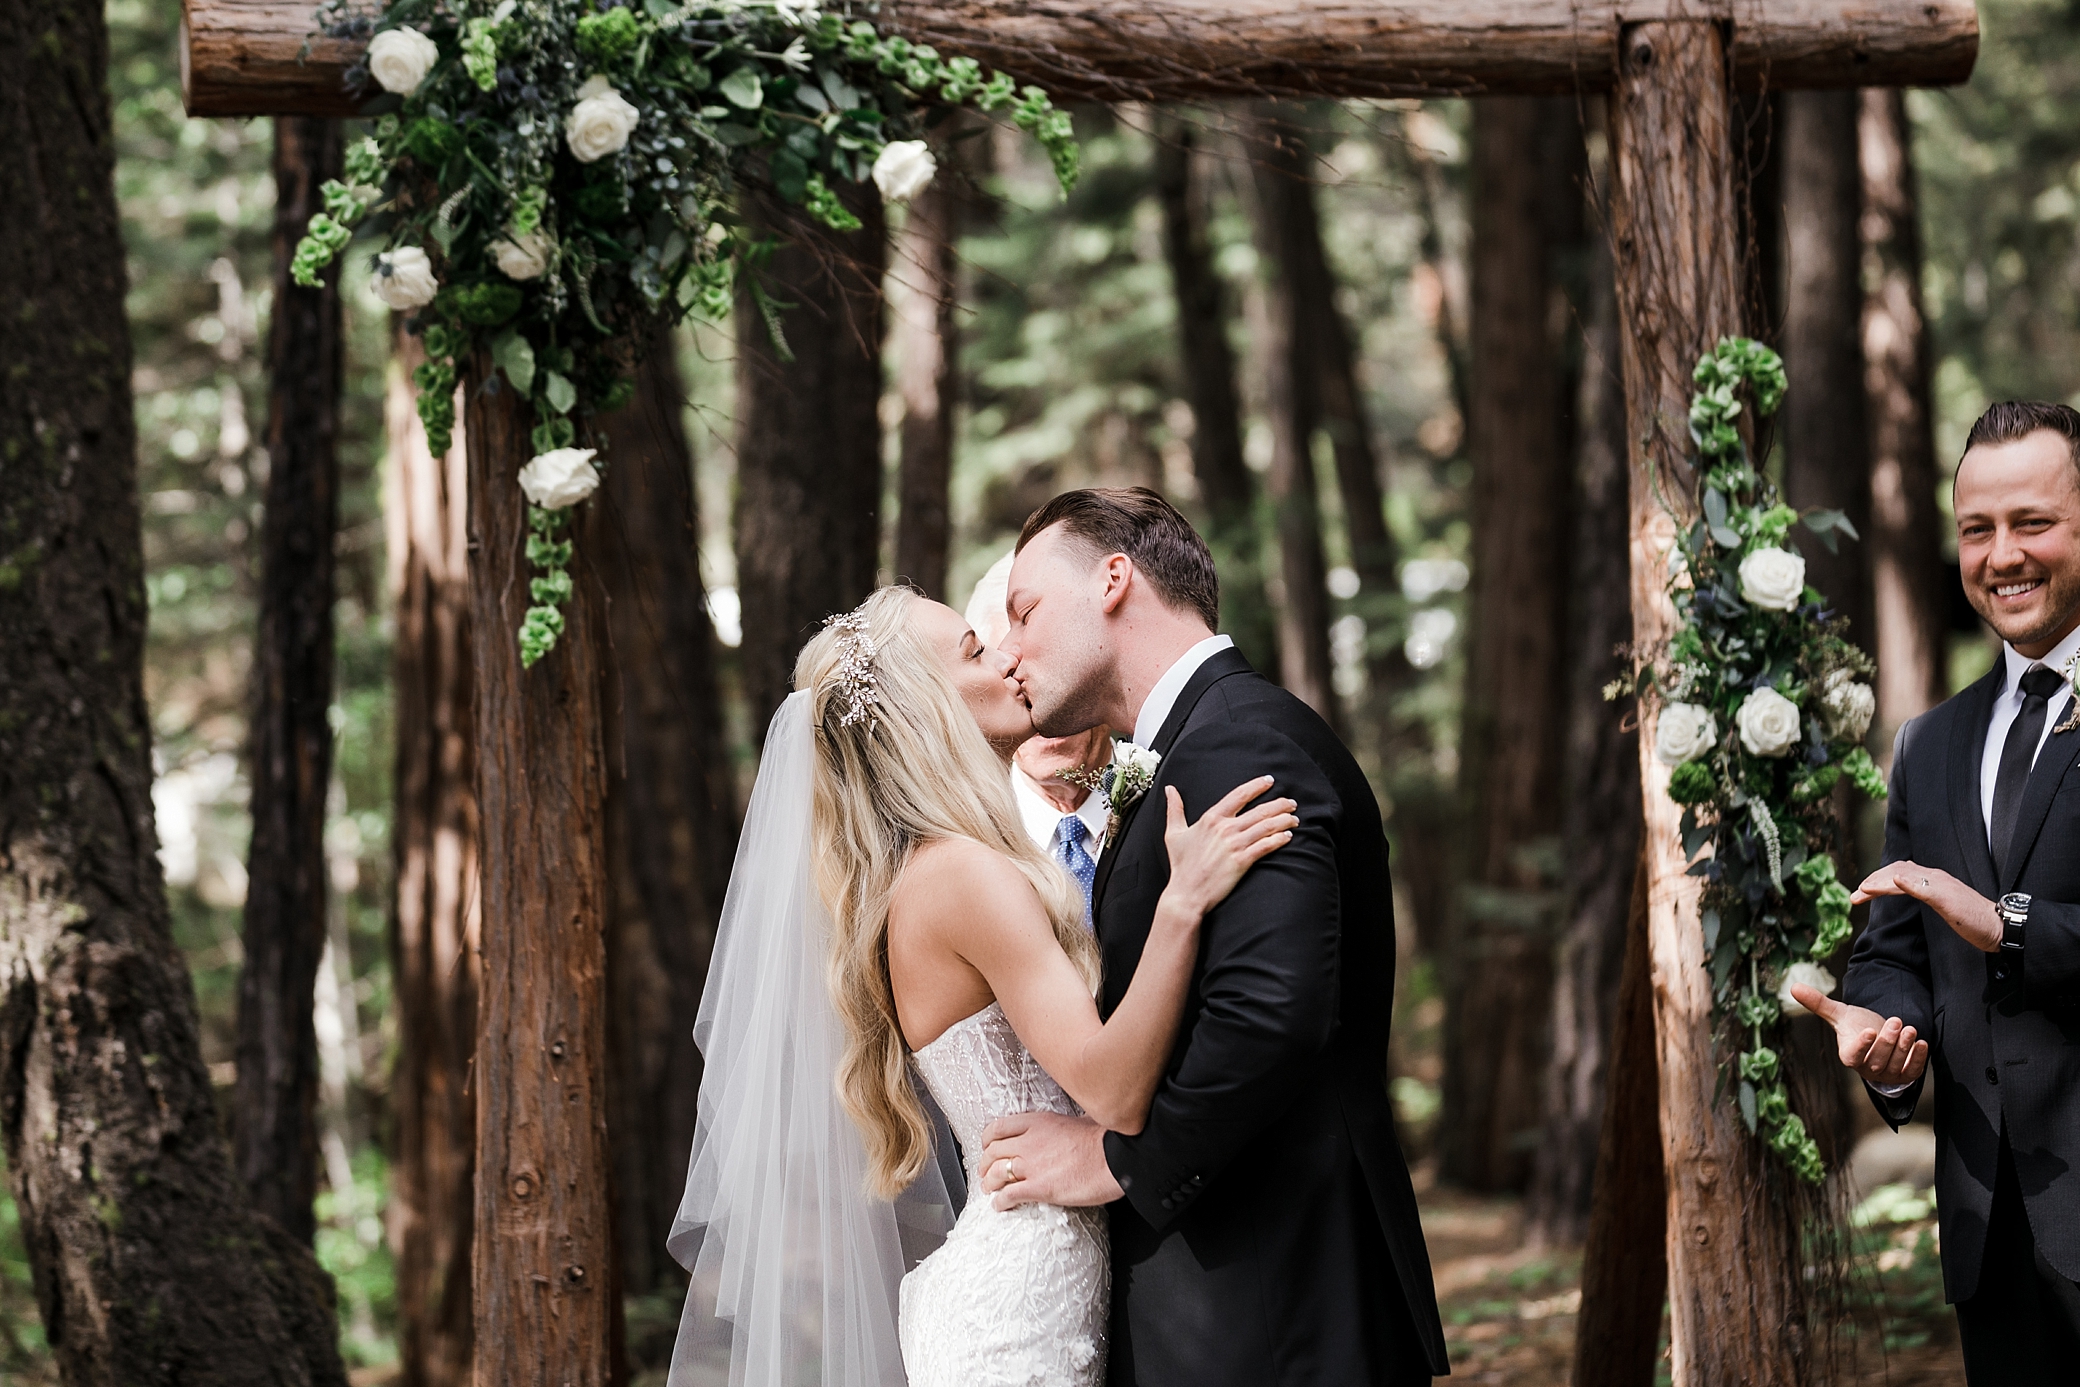 Bride and Groom first kiss | Megan Montalvo Photography 